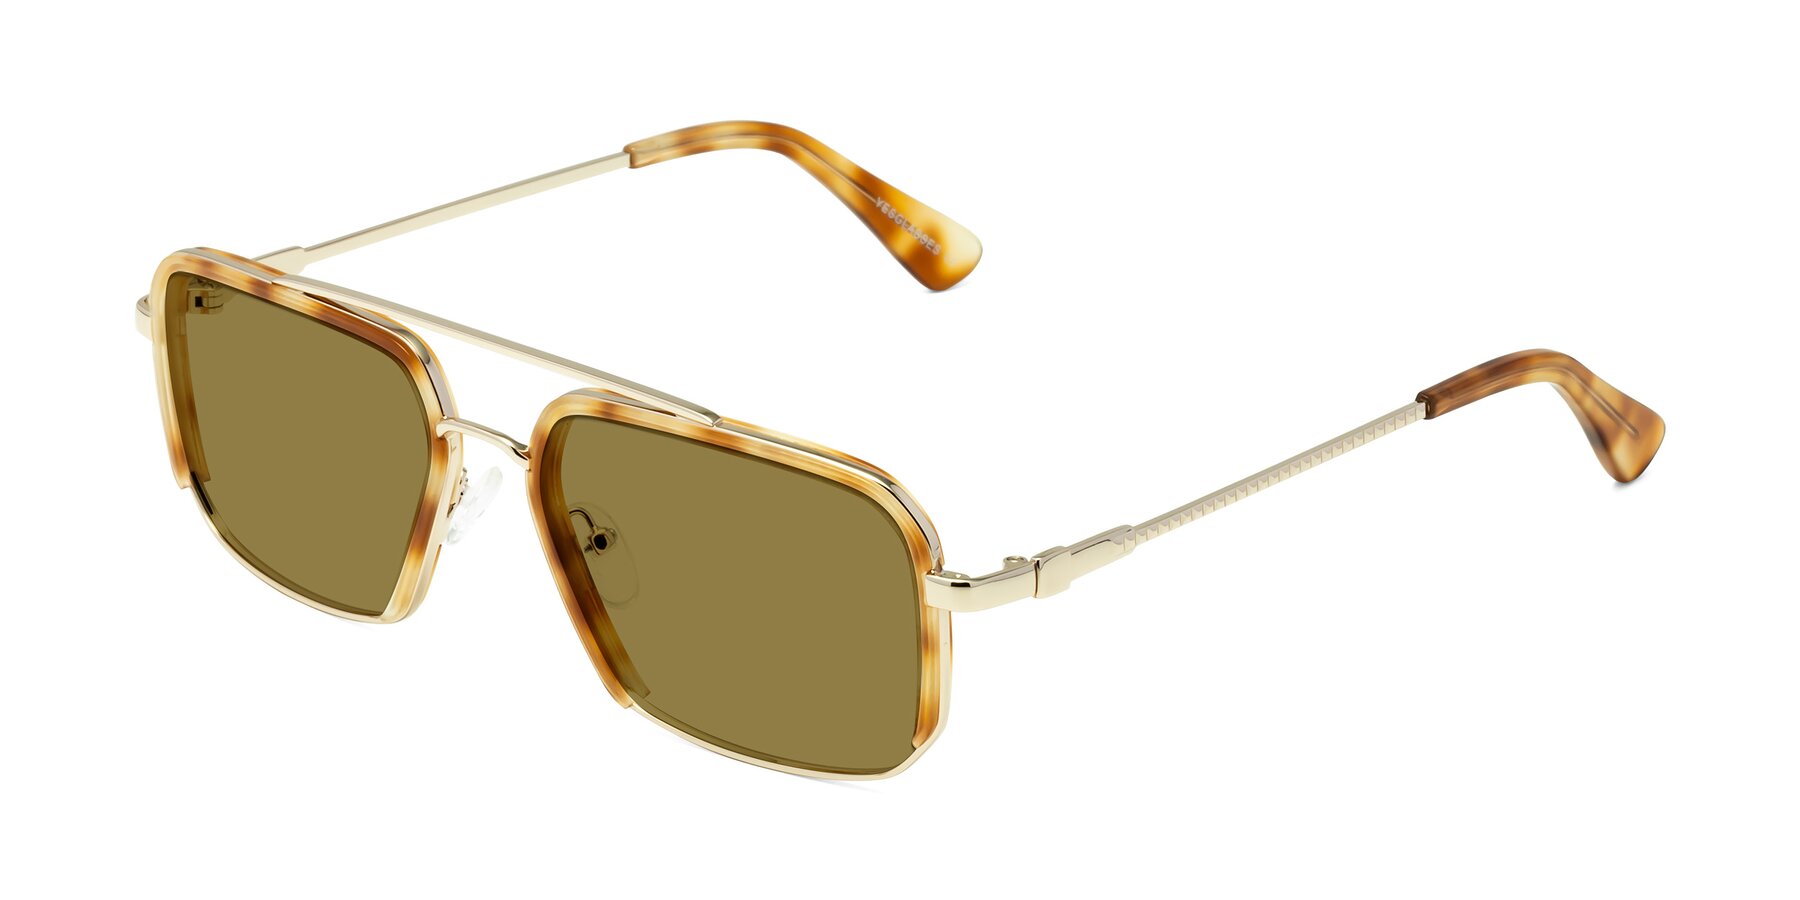 Angle of Dechter in Yellow Tortoise-Gold with Brown Polarized Lenses